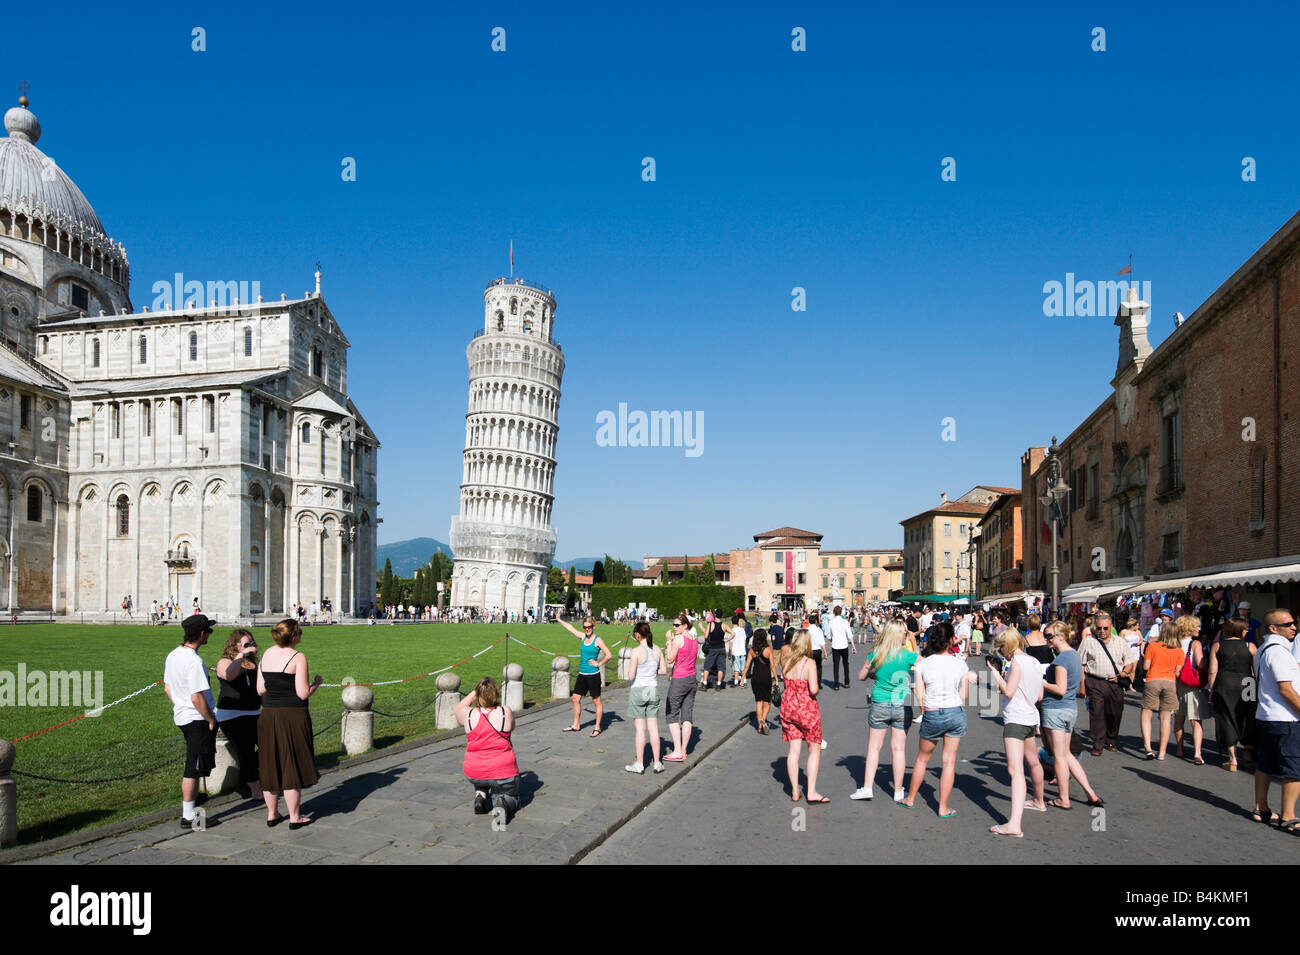 People posing for photographs in front of the Duomo and Leaning Tower, Piazza dei Miracoli, Pisa, Tuscany, Italy Stock Photo